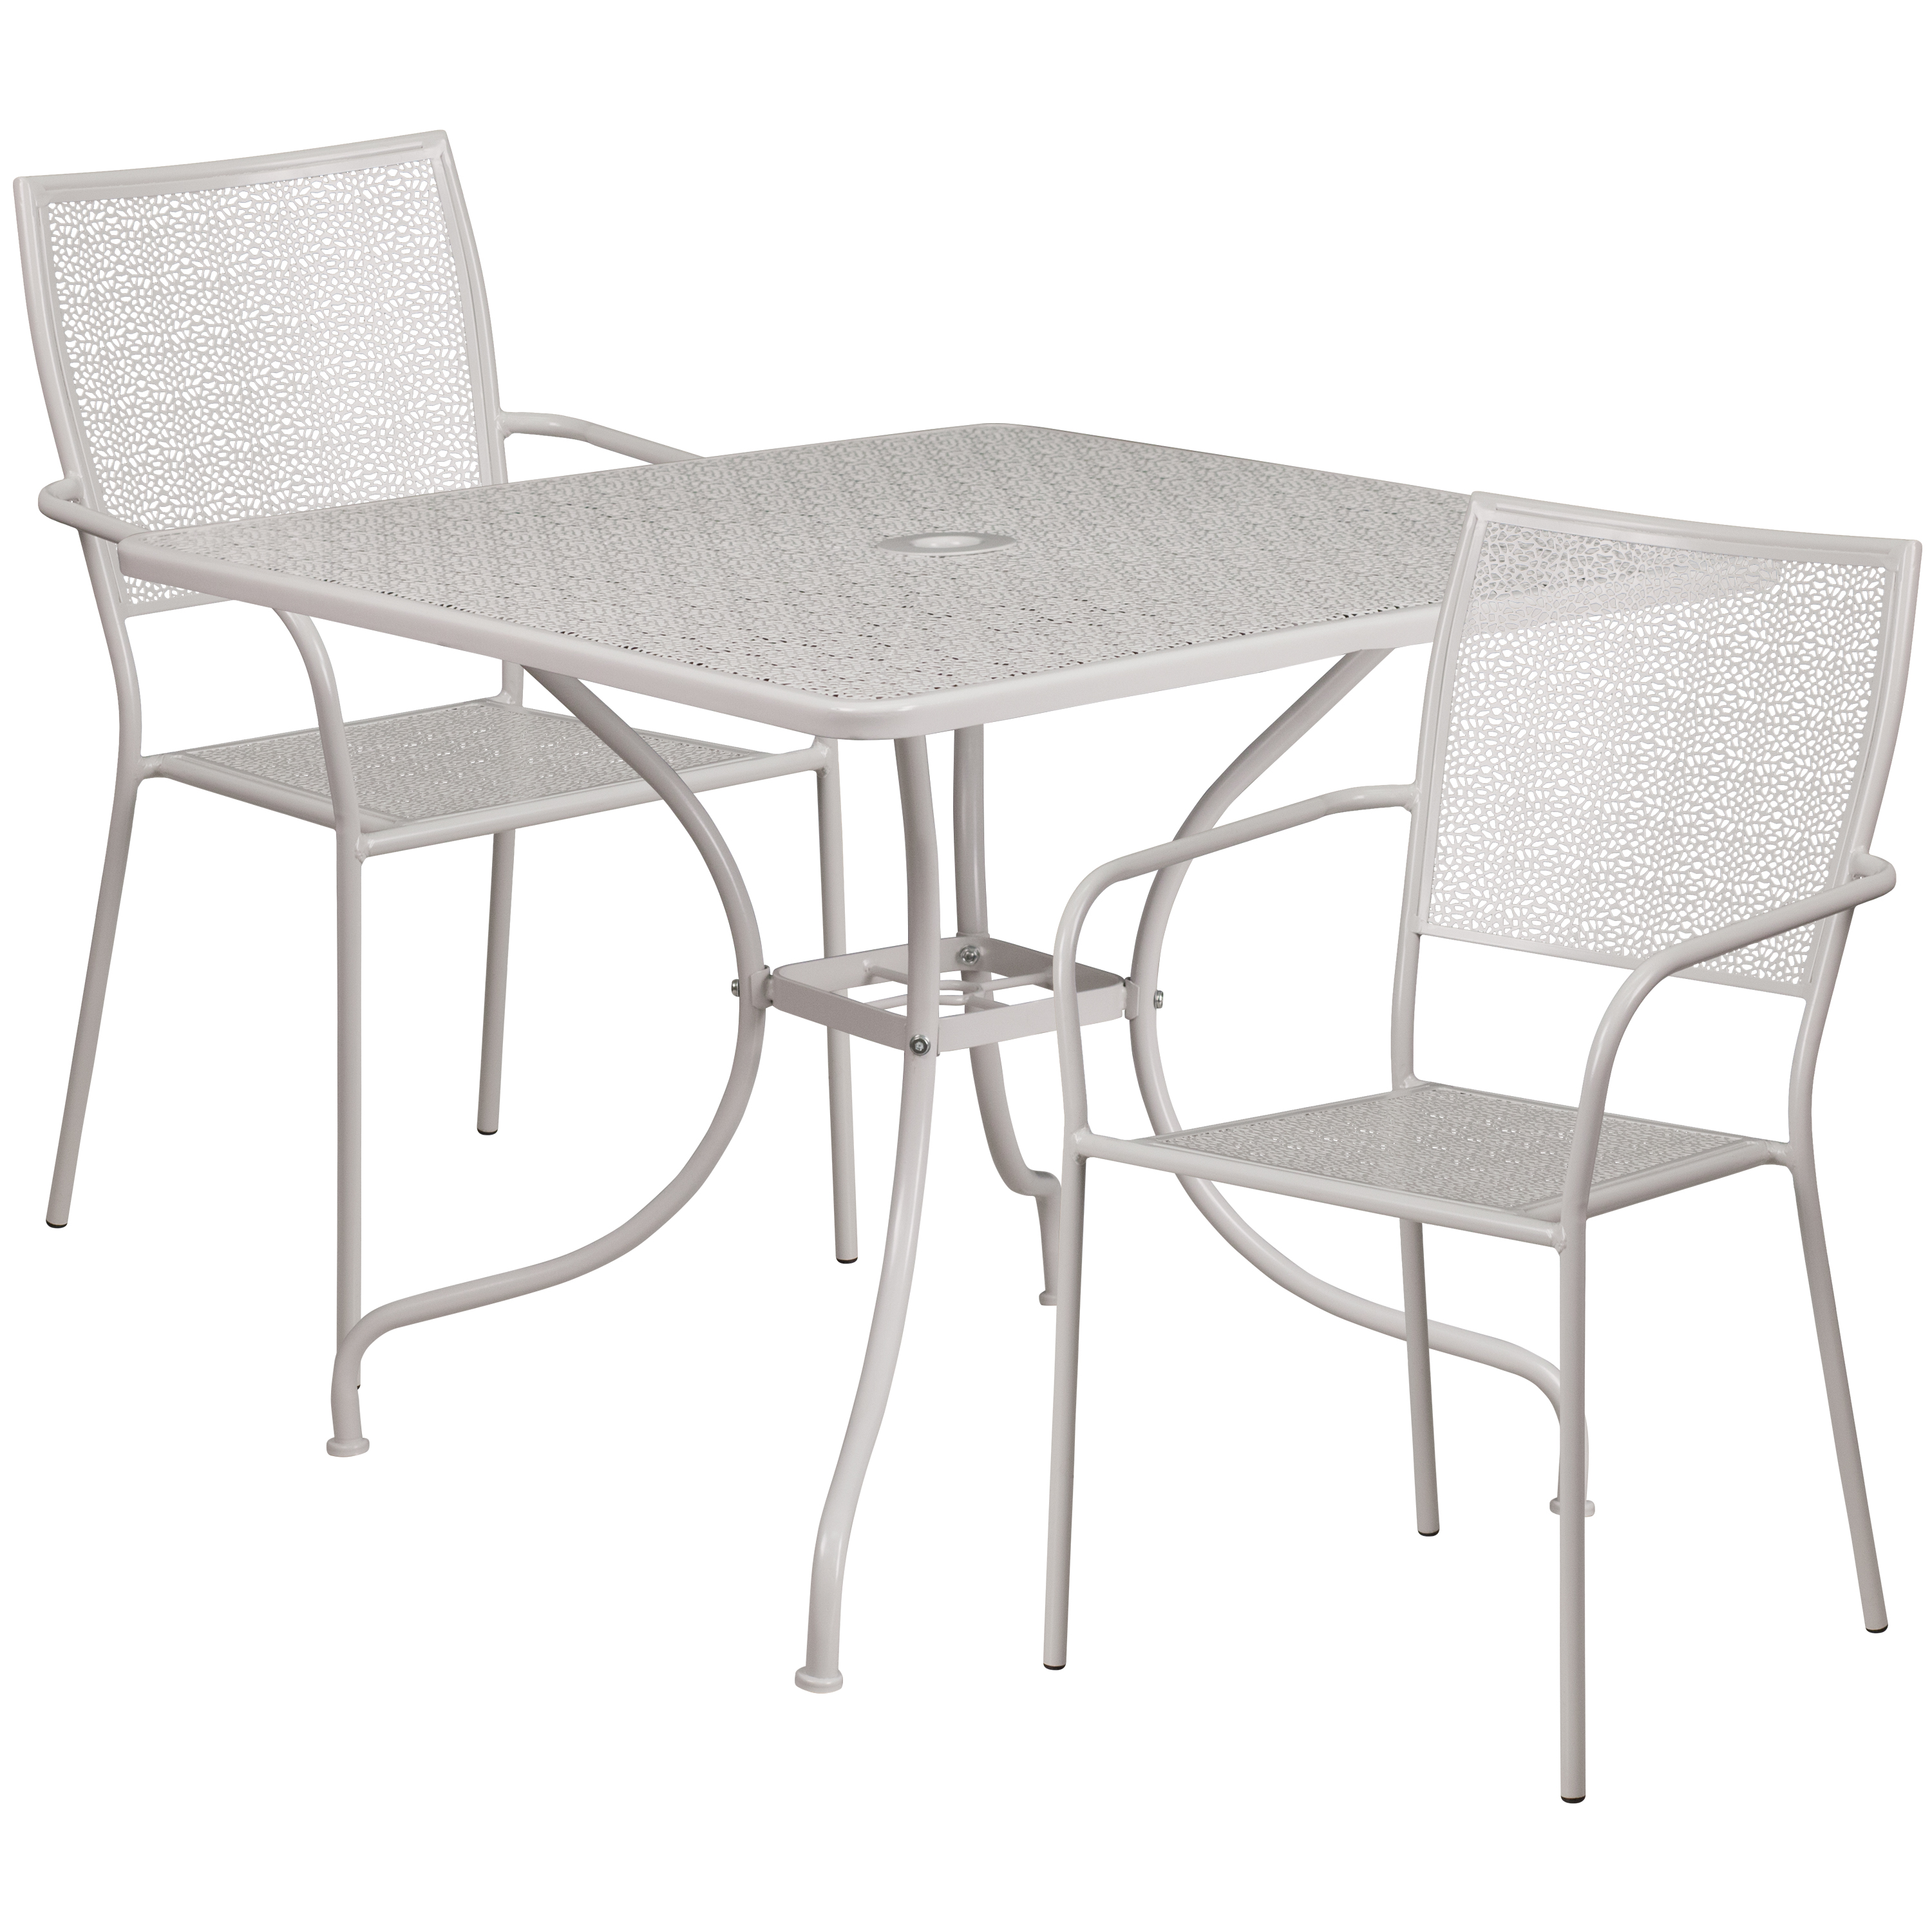 Flash Furniture CO-35SQ-02CHR2-SIL-GG 35.5" Square Light Gray Indoor/Outdoor Steel Patio Table Set with 2 Square Back Chairs